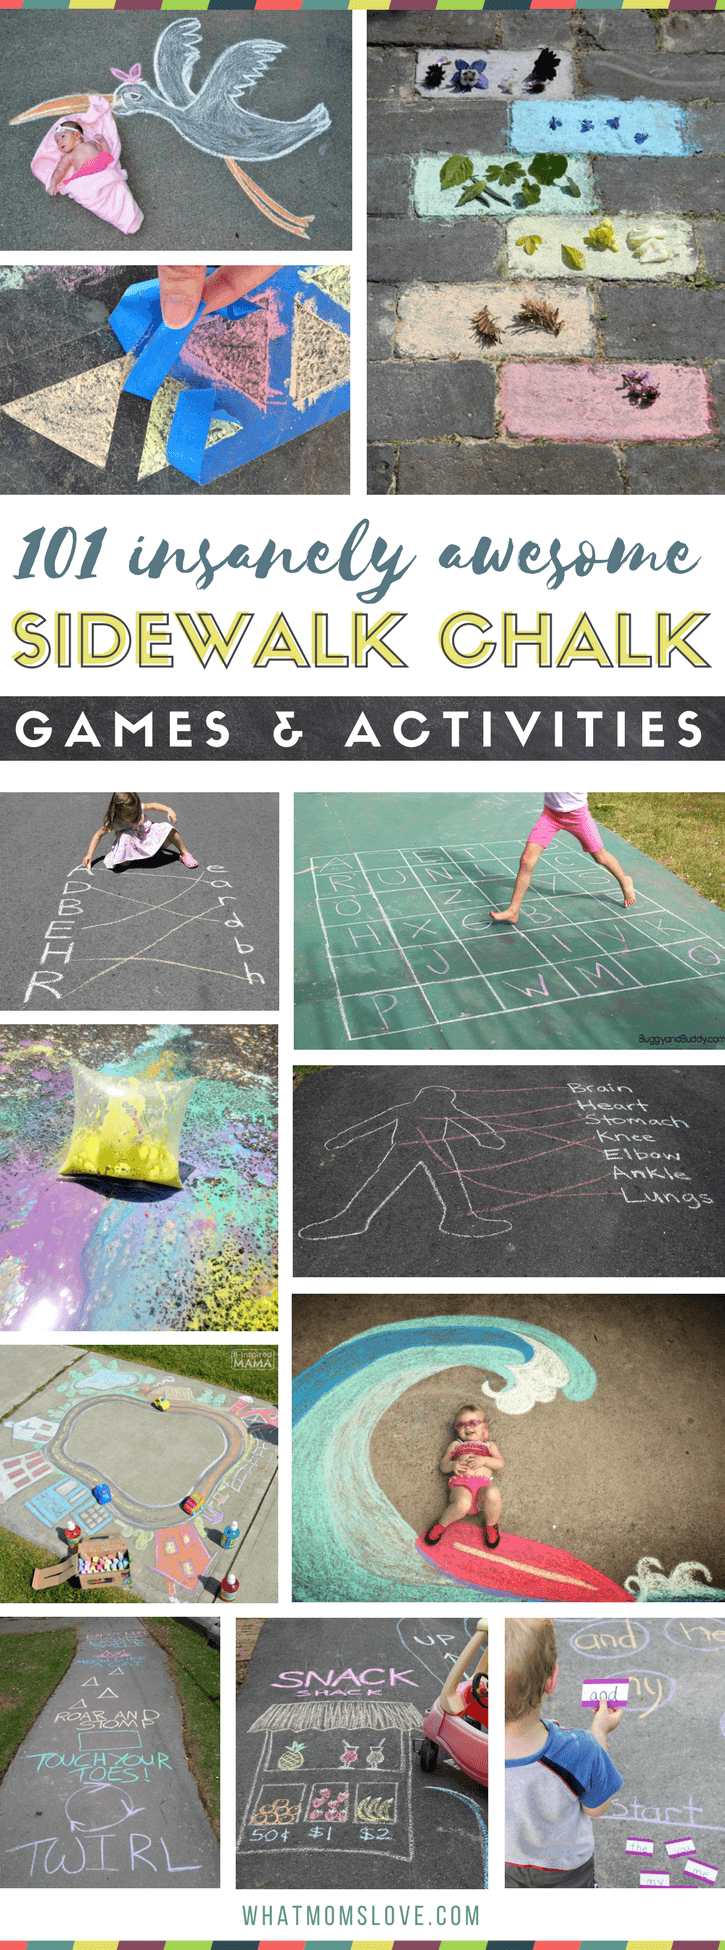 Sidewalk Chalk Ideas For Kids | Fun games and activities to play on your driveway or walkway including learning, educational and active play | Easy chalk art ideas that integrate your child - so cool! Great ideas for things to do outside over the summer to stop boredom before it starts.